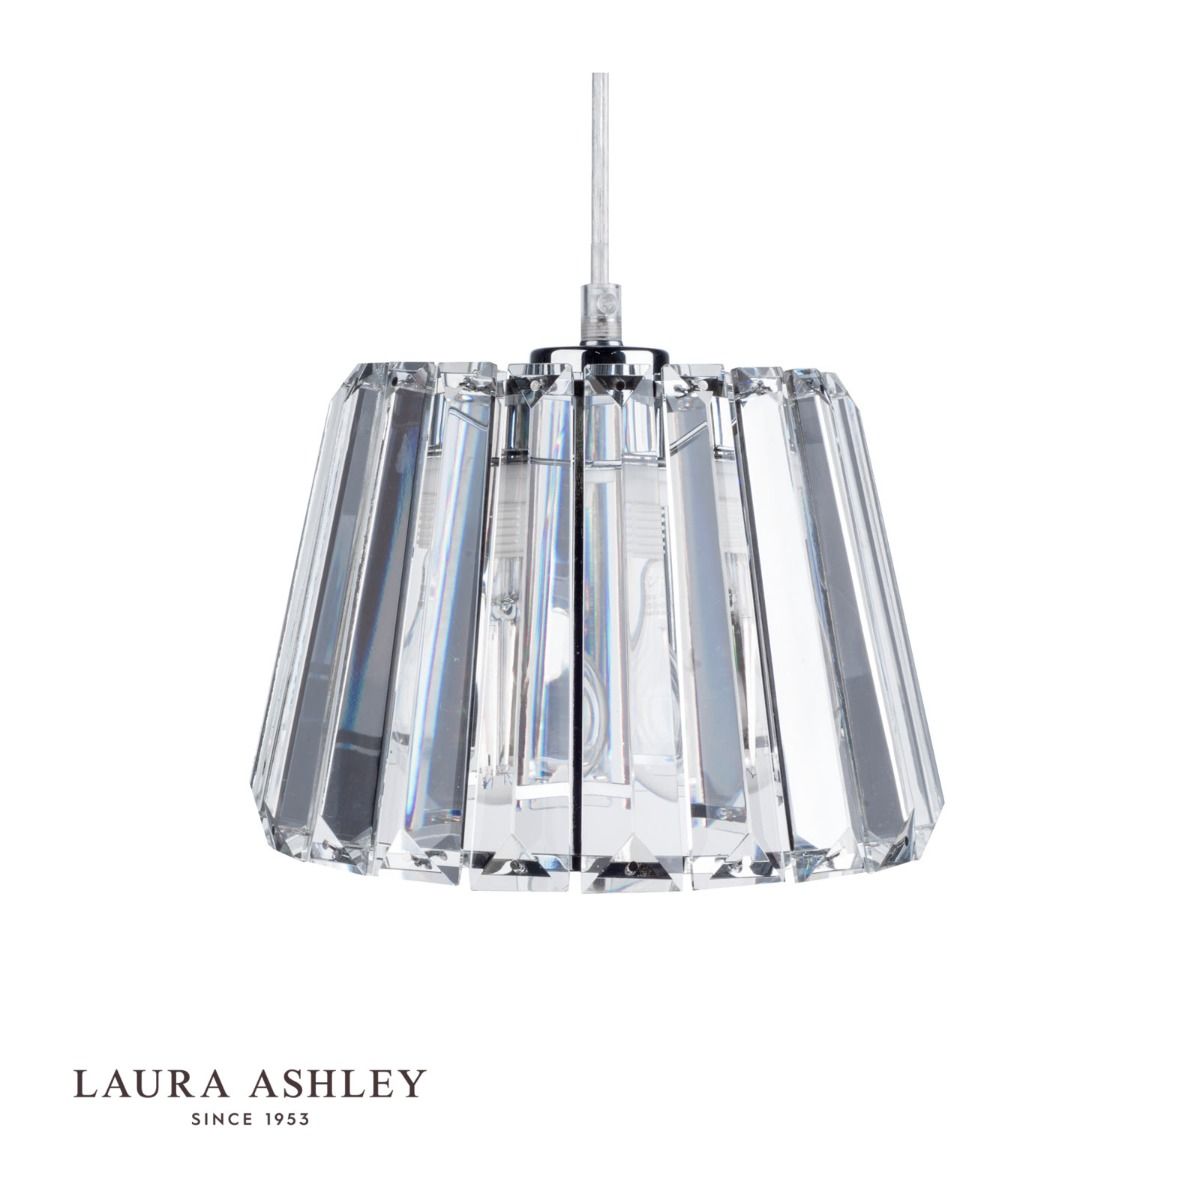 Laura Ashley Capri Crystal Glass Easy, Crystal Vanity Light Shade Replacement